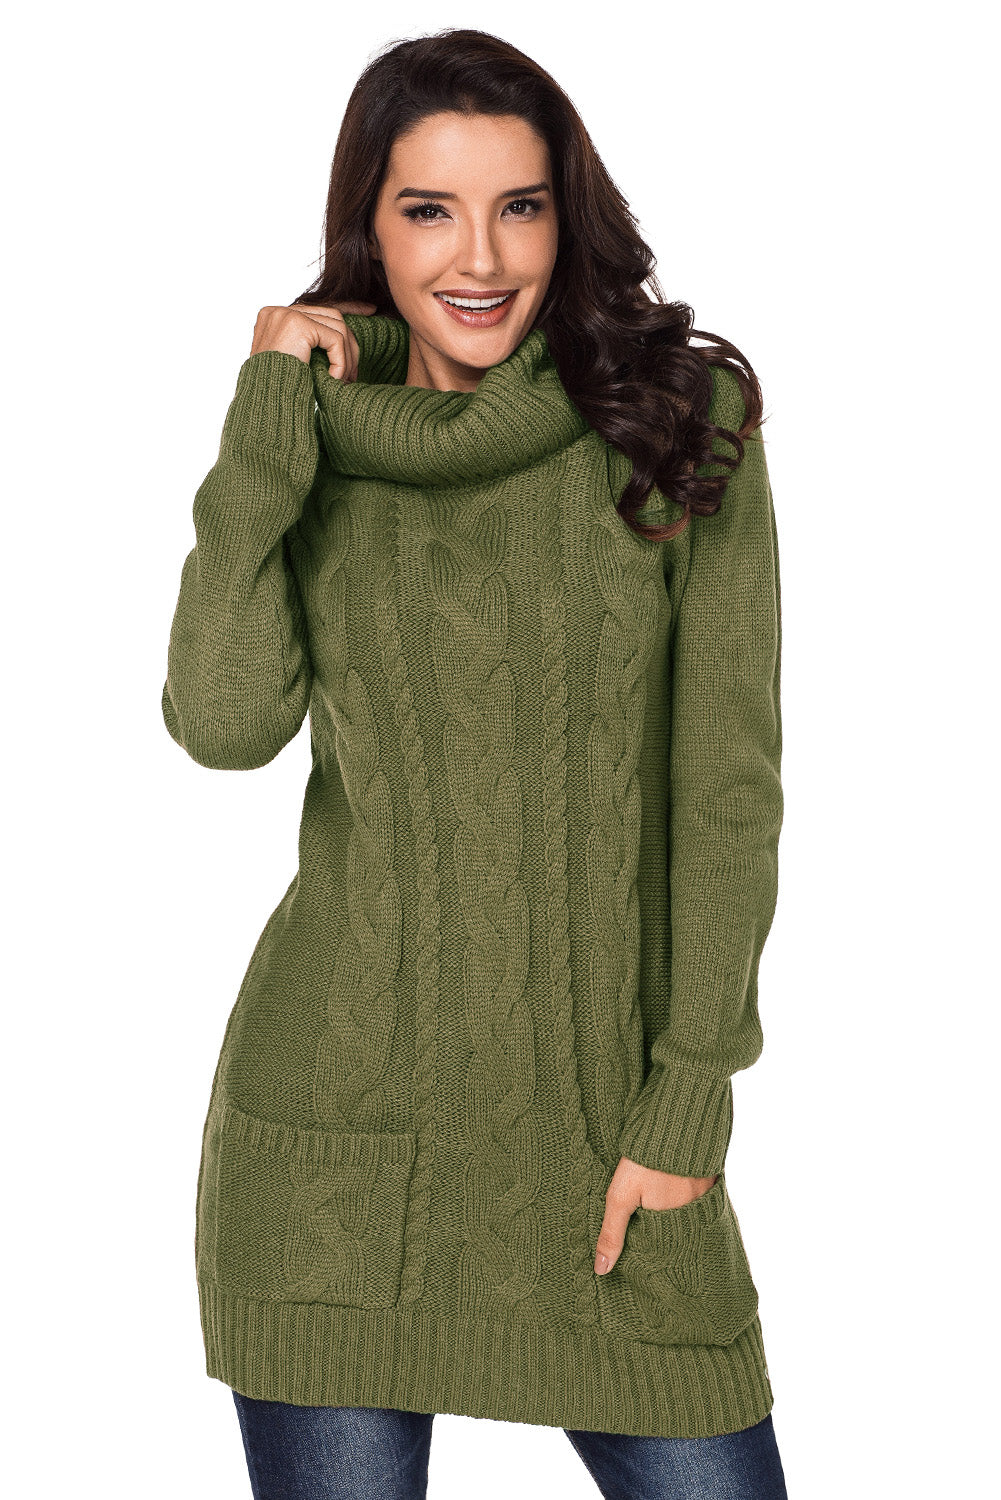  Olive Cowl Neck Pocket Cable Knit Sweater Dress